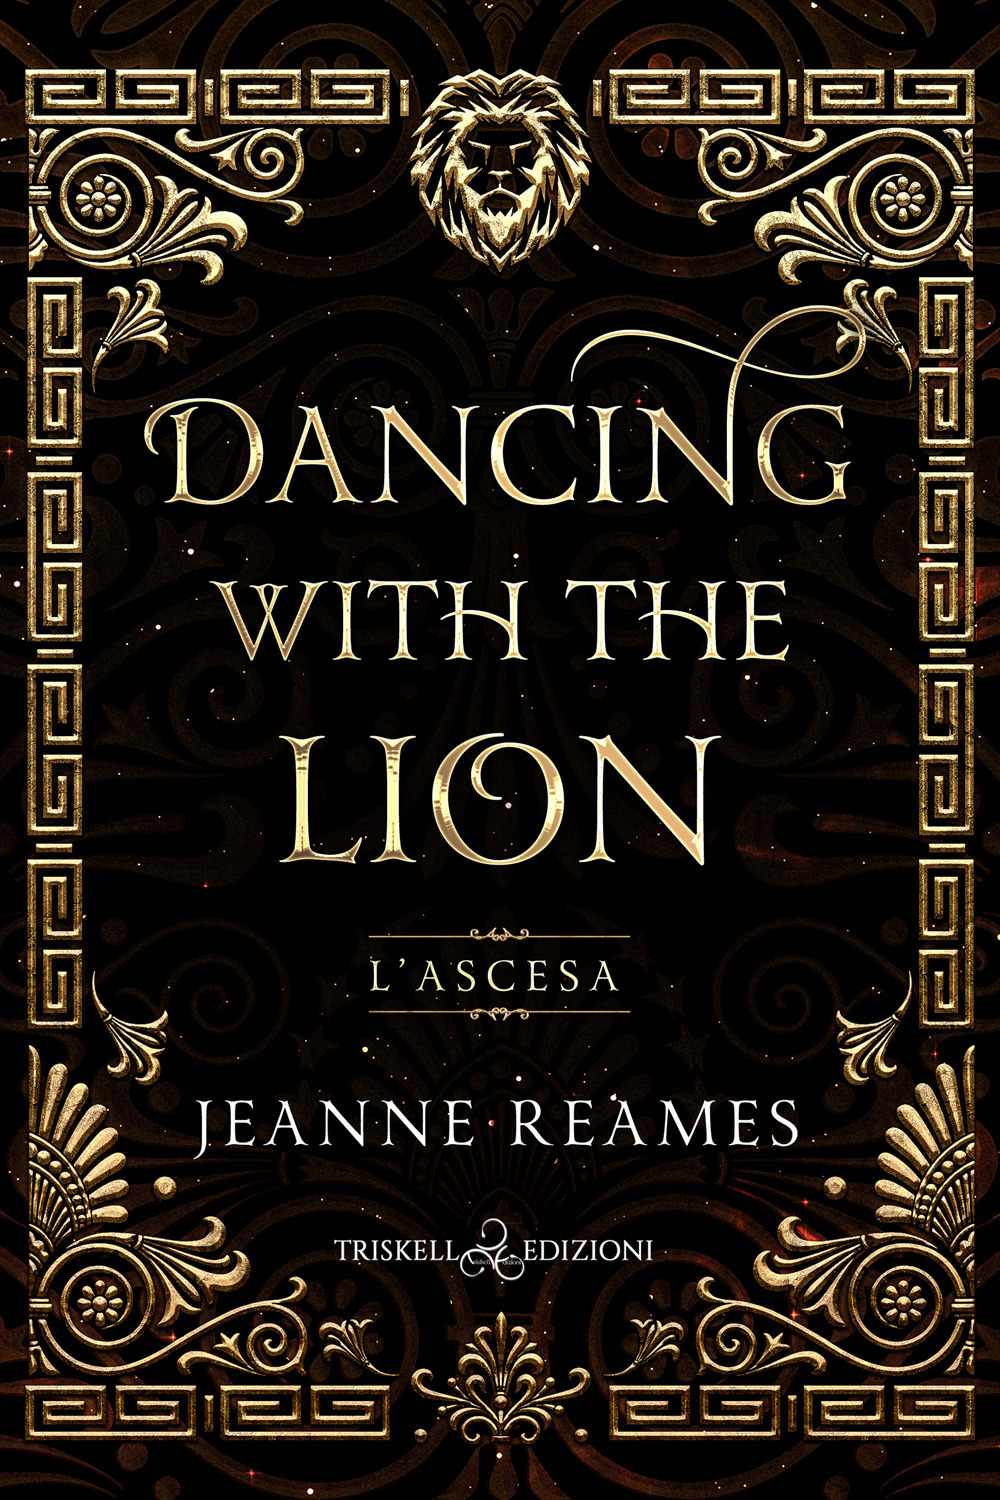 L'ascesa. Dancing with the lion